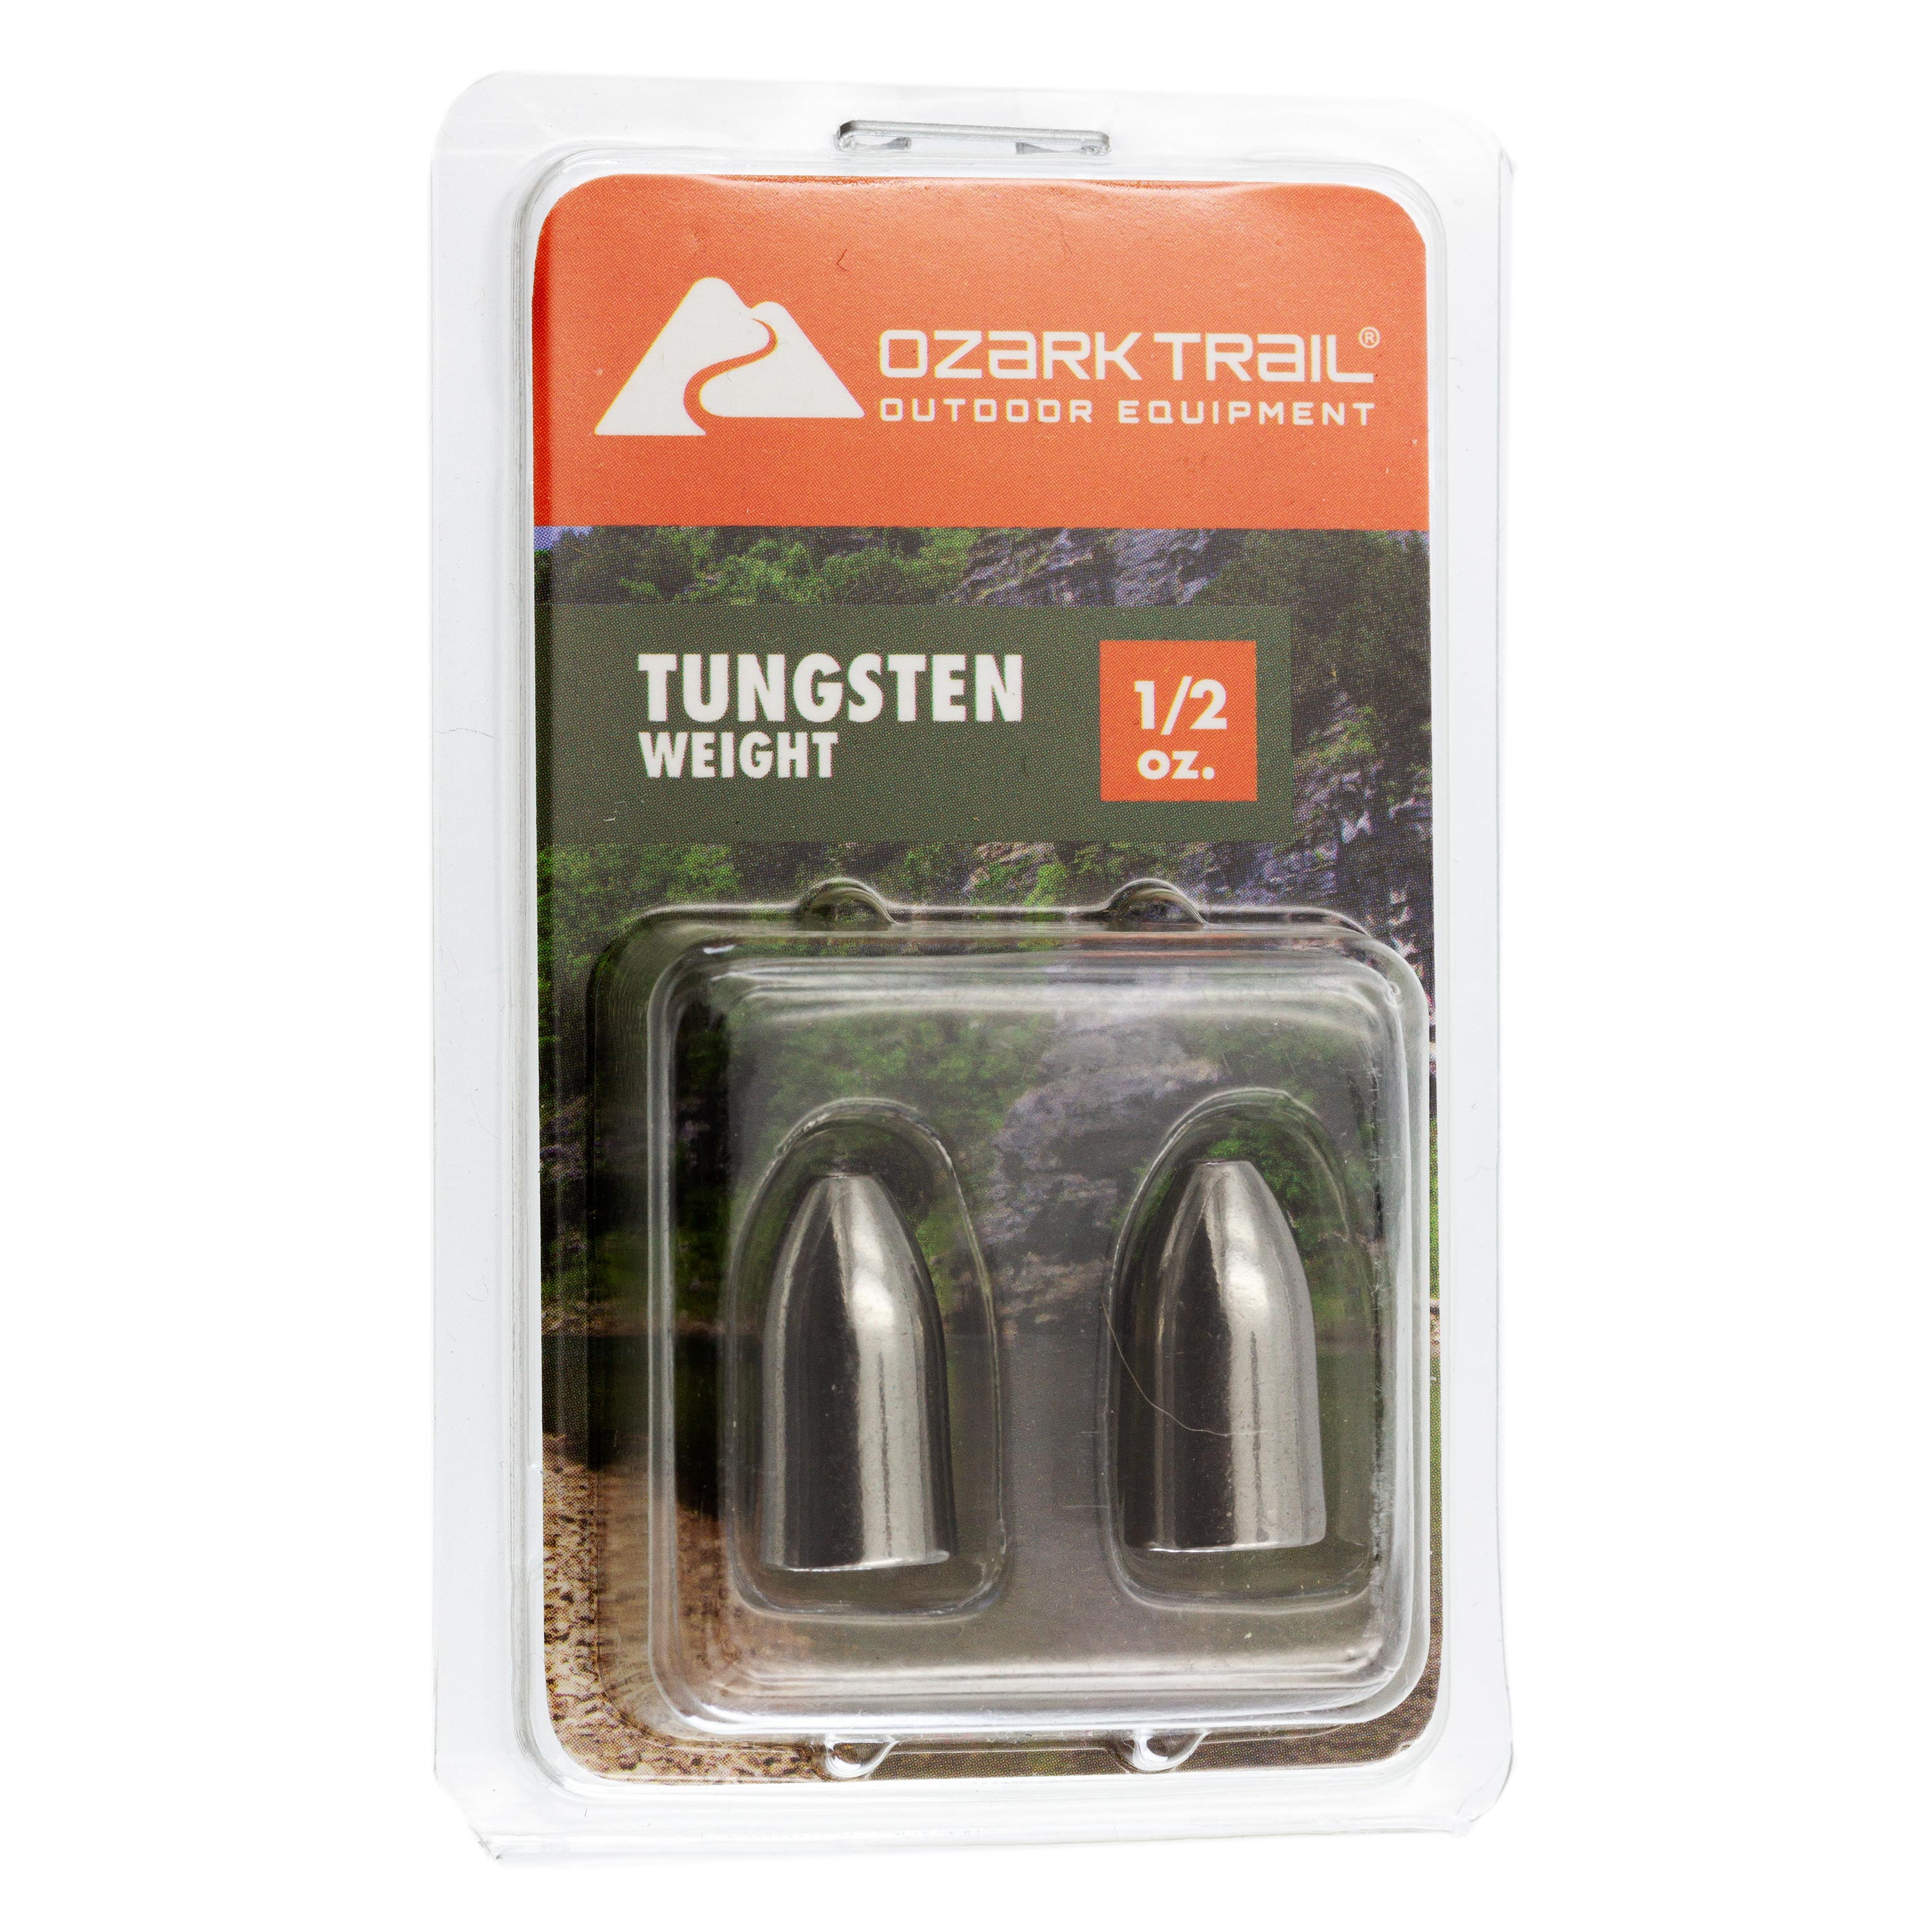 Ozark Trail 3/16-Ounce Tungsten Fishing Worm Weight, 4pcs - Natural 